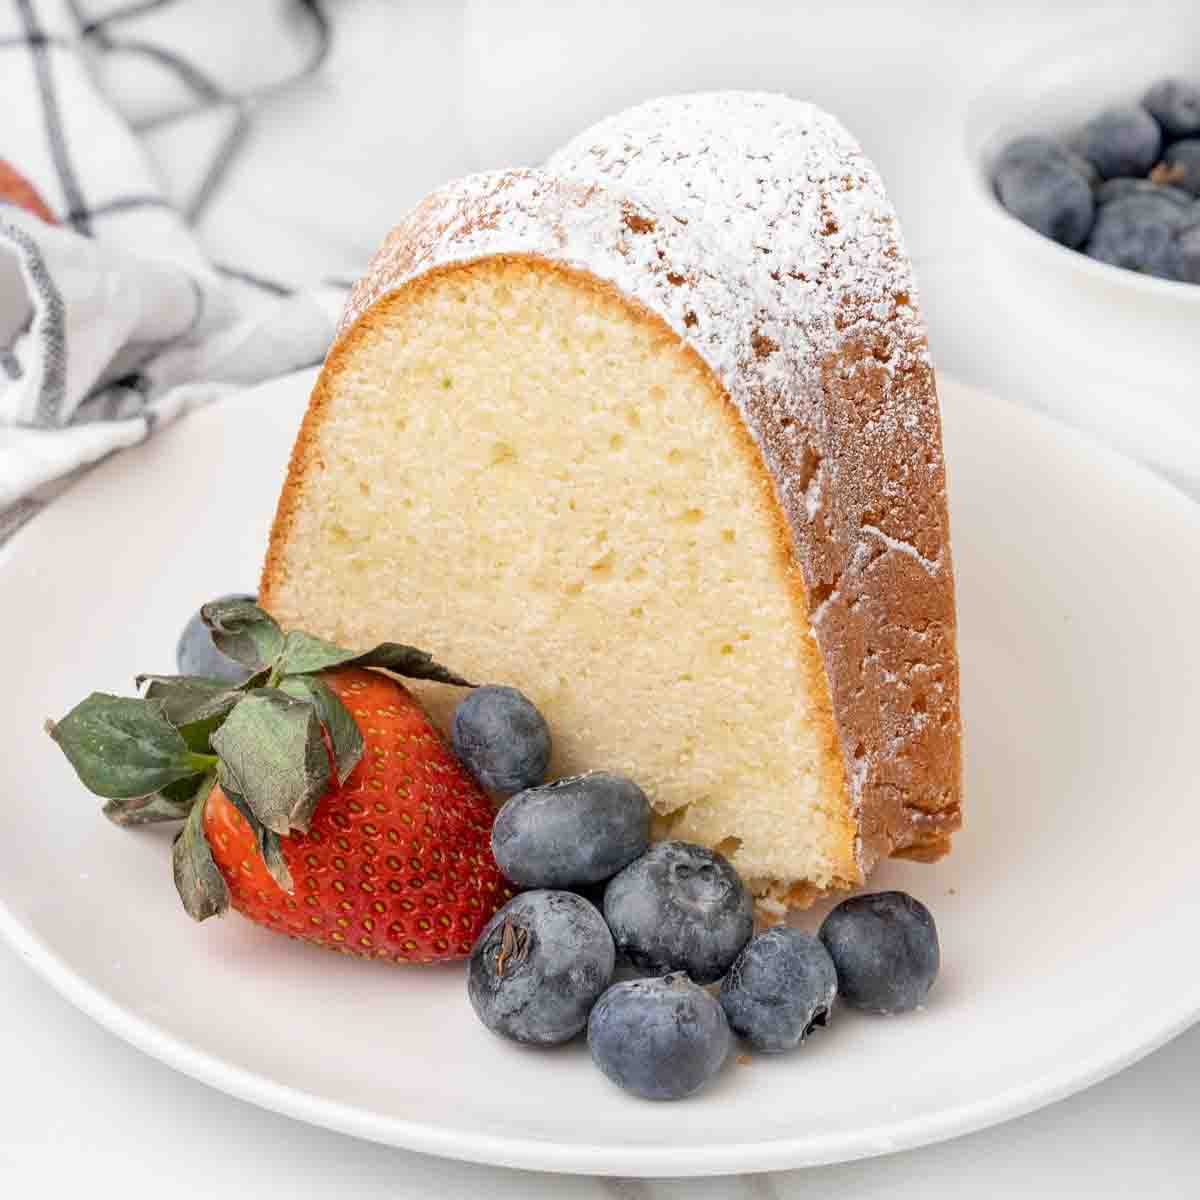 Slice of cream cheese pound cake on white plate with berries.